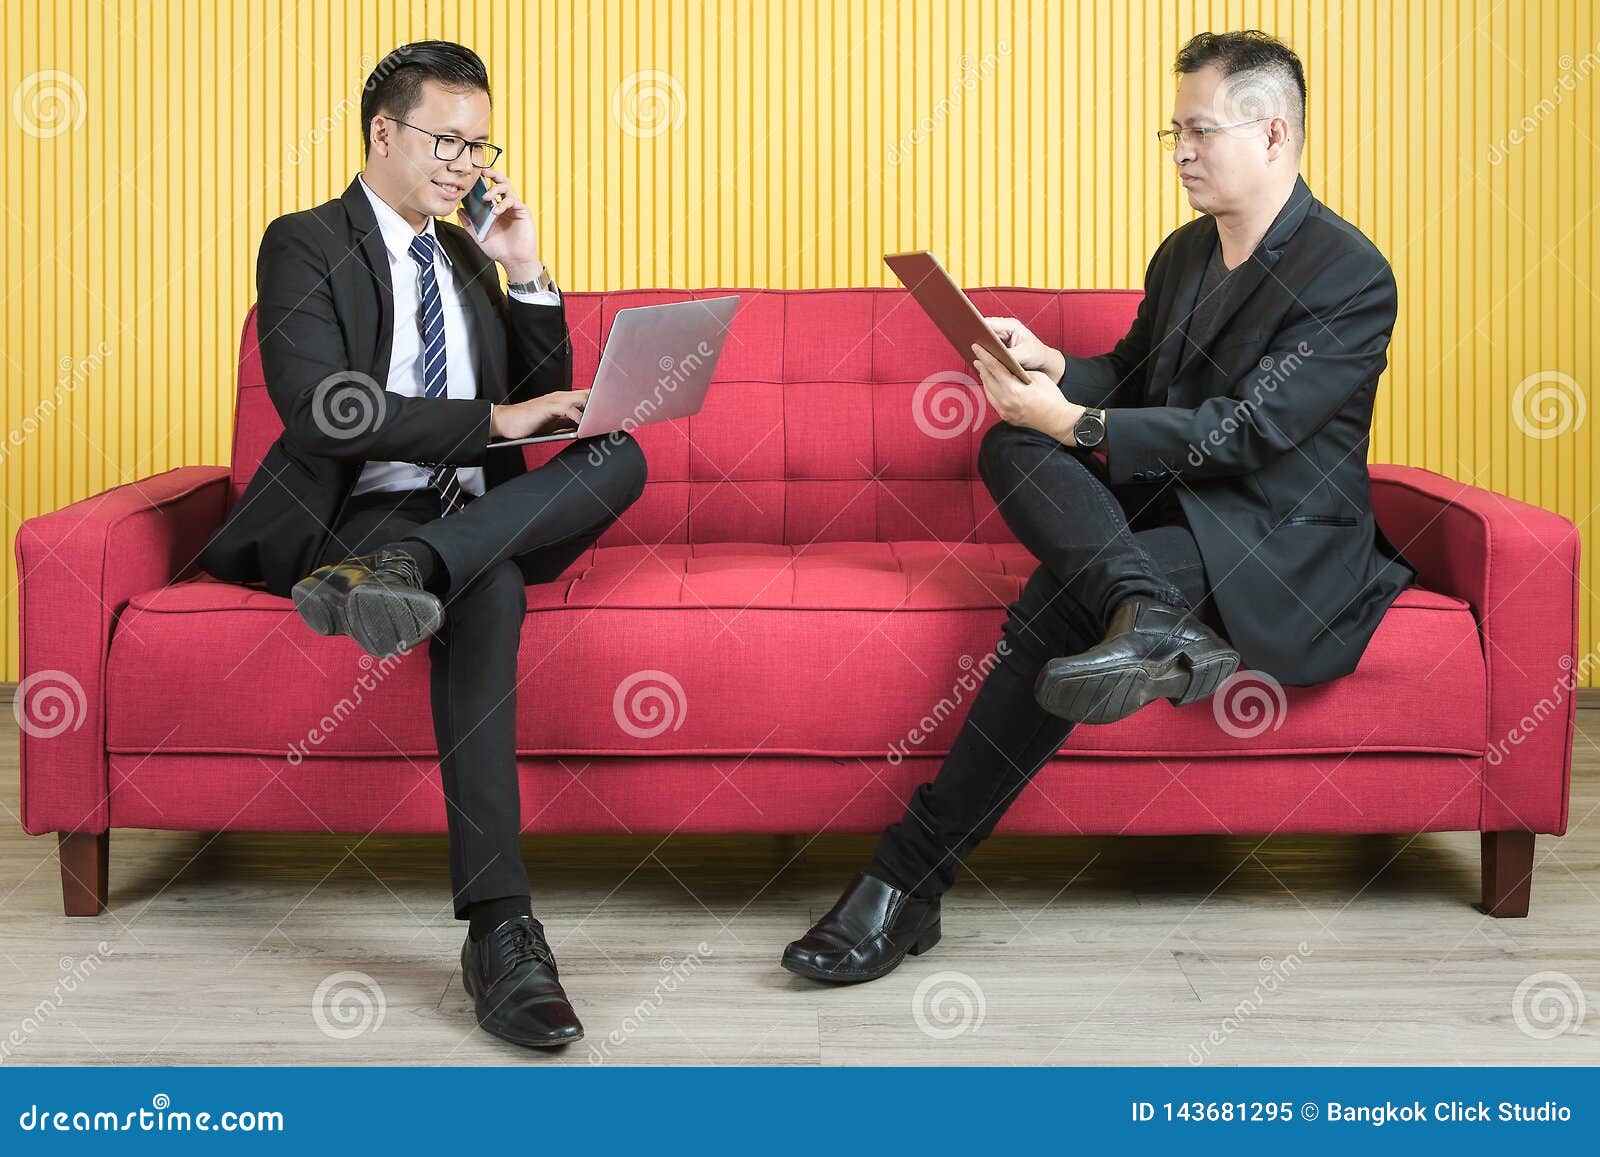 Asian businessman at office. Young and middle aged Asian businessmen wearing eyeglasses in dark suit, both busily checking data from tablet and notebook, working on new project in modern living room background